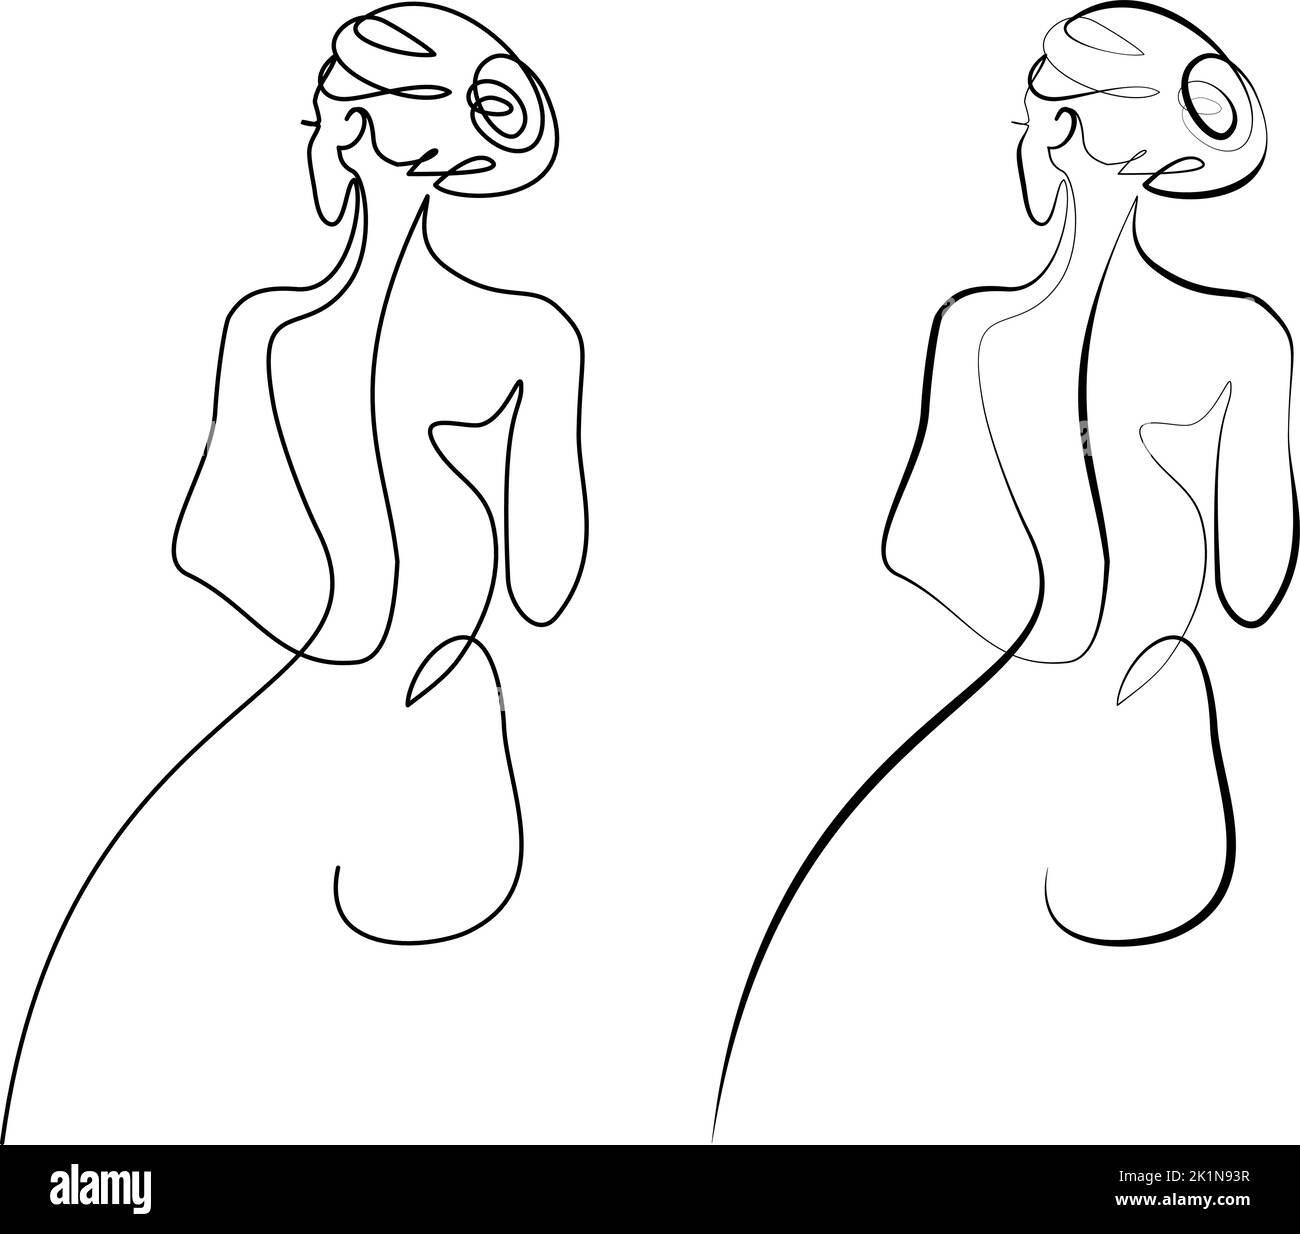 Womans body back. Continuous one black line drawing isolated on white background. Vector illustration Stock Vector